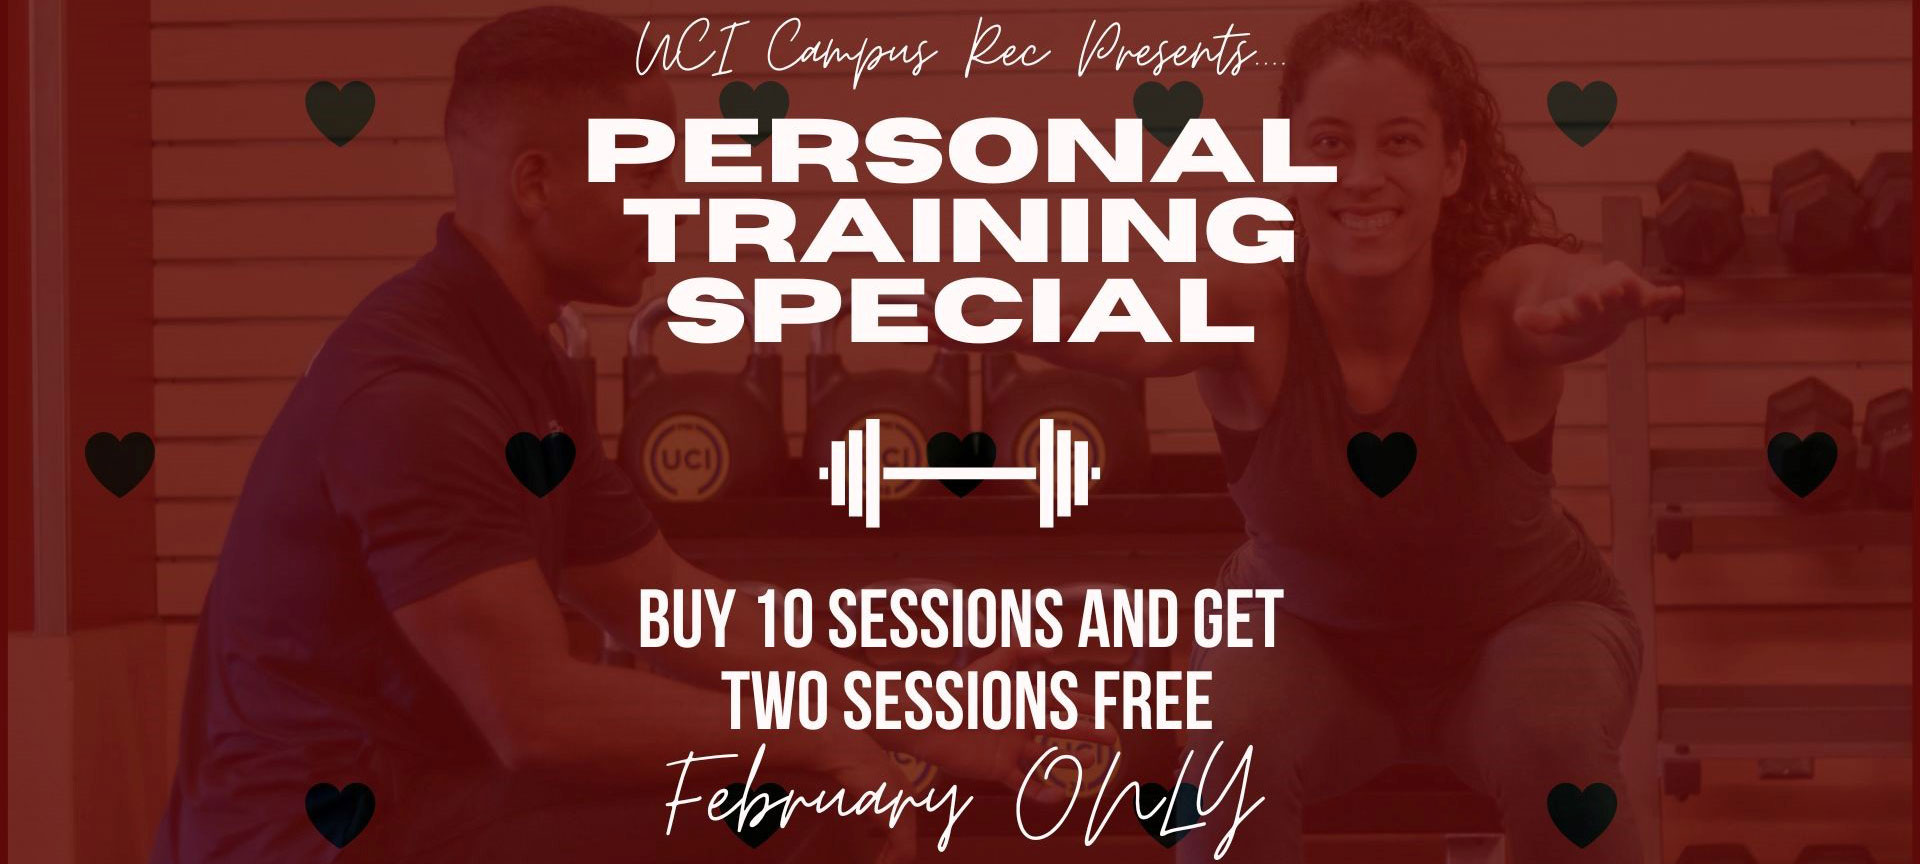 Personal Training - February Special